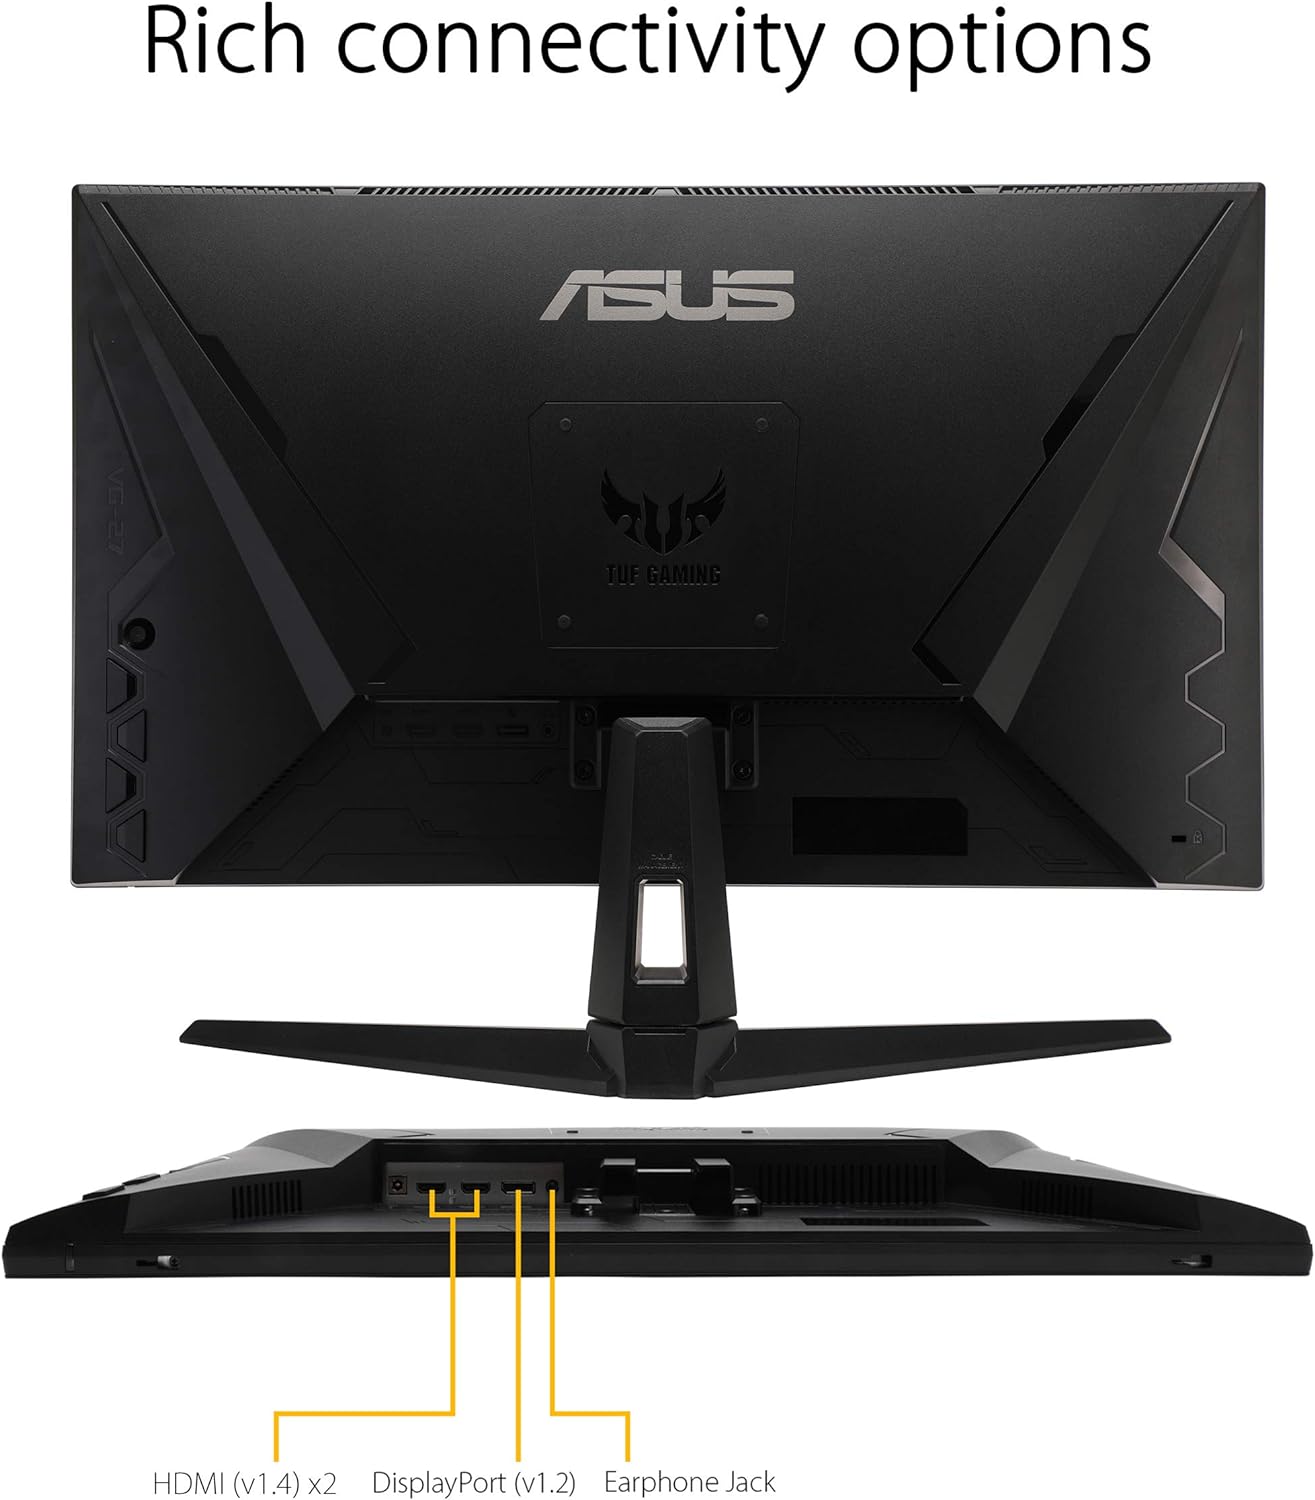 ASUS TUF Gaming VG279Q1A 27 Monitor - Robust connectivity with DisplayPort and HDMI ports for versatile usage. 0192876870327